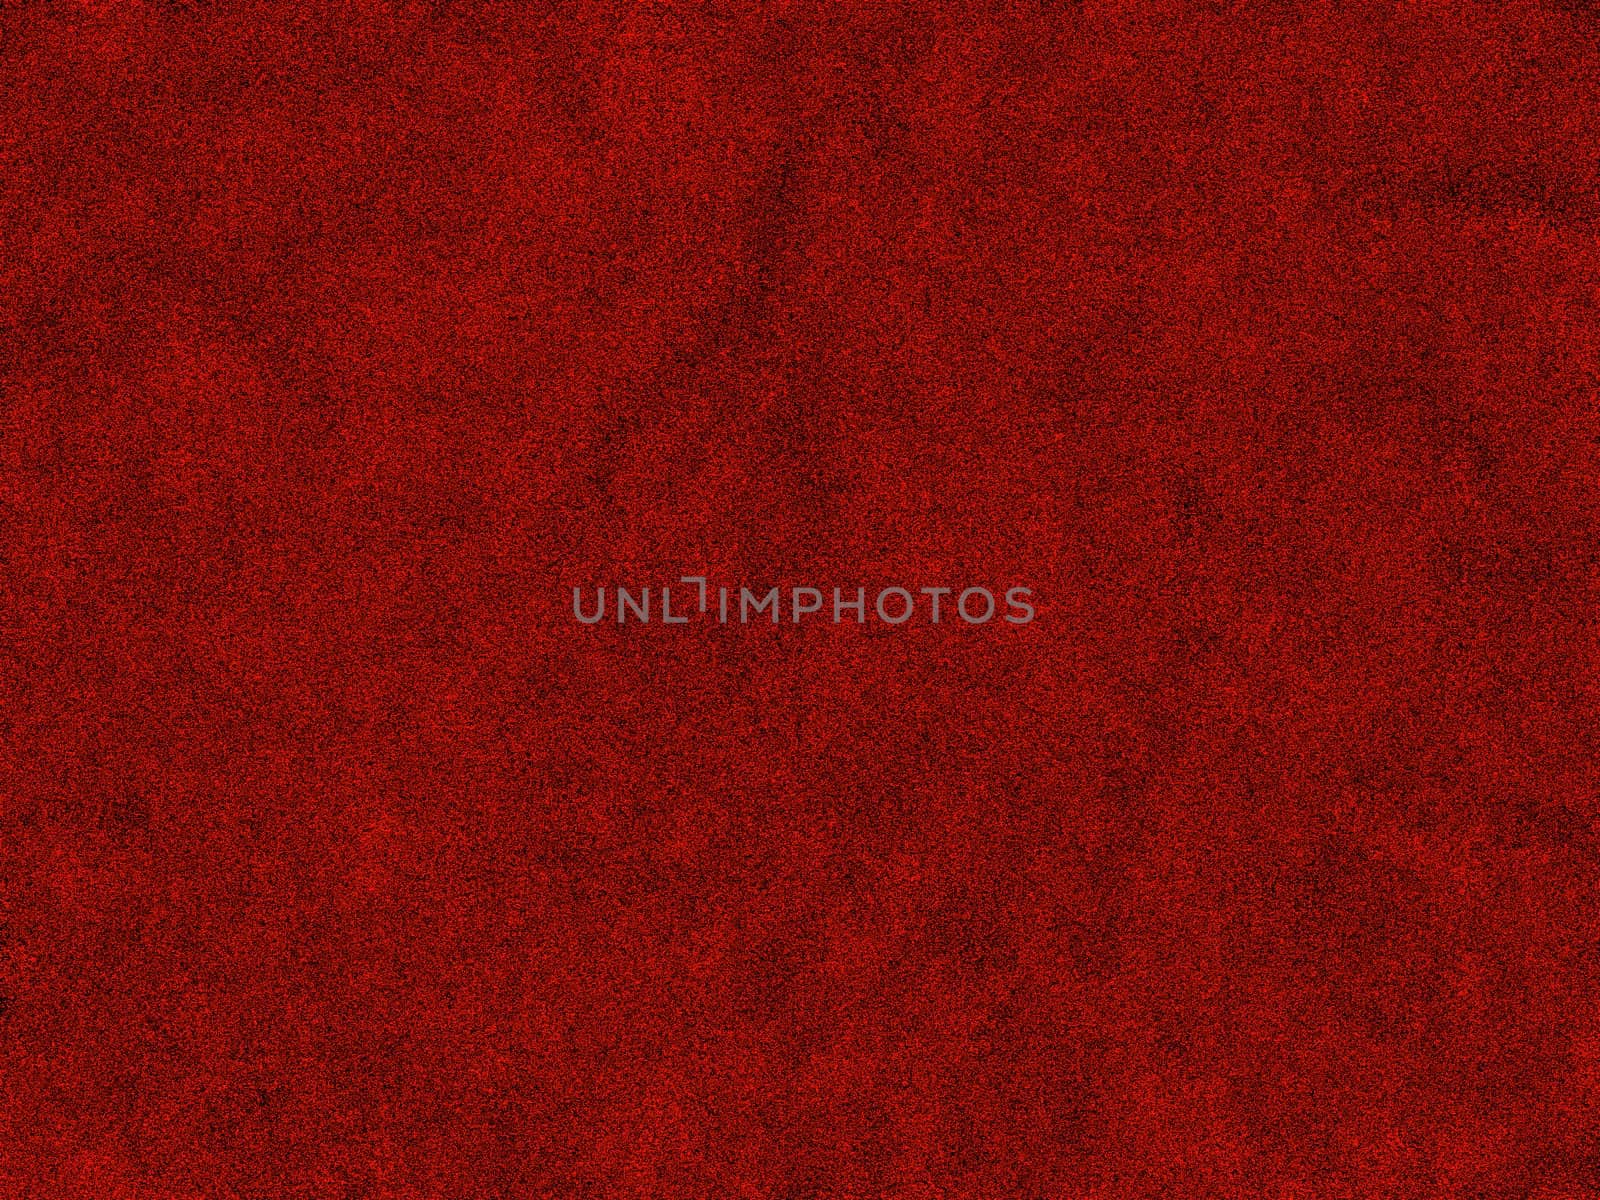 image of the strange red abstract background